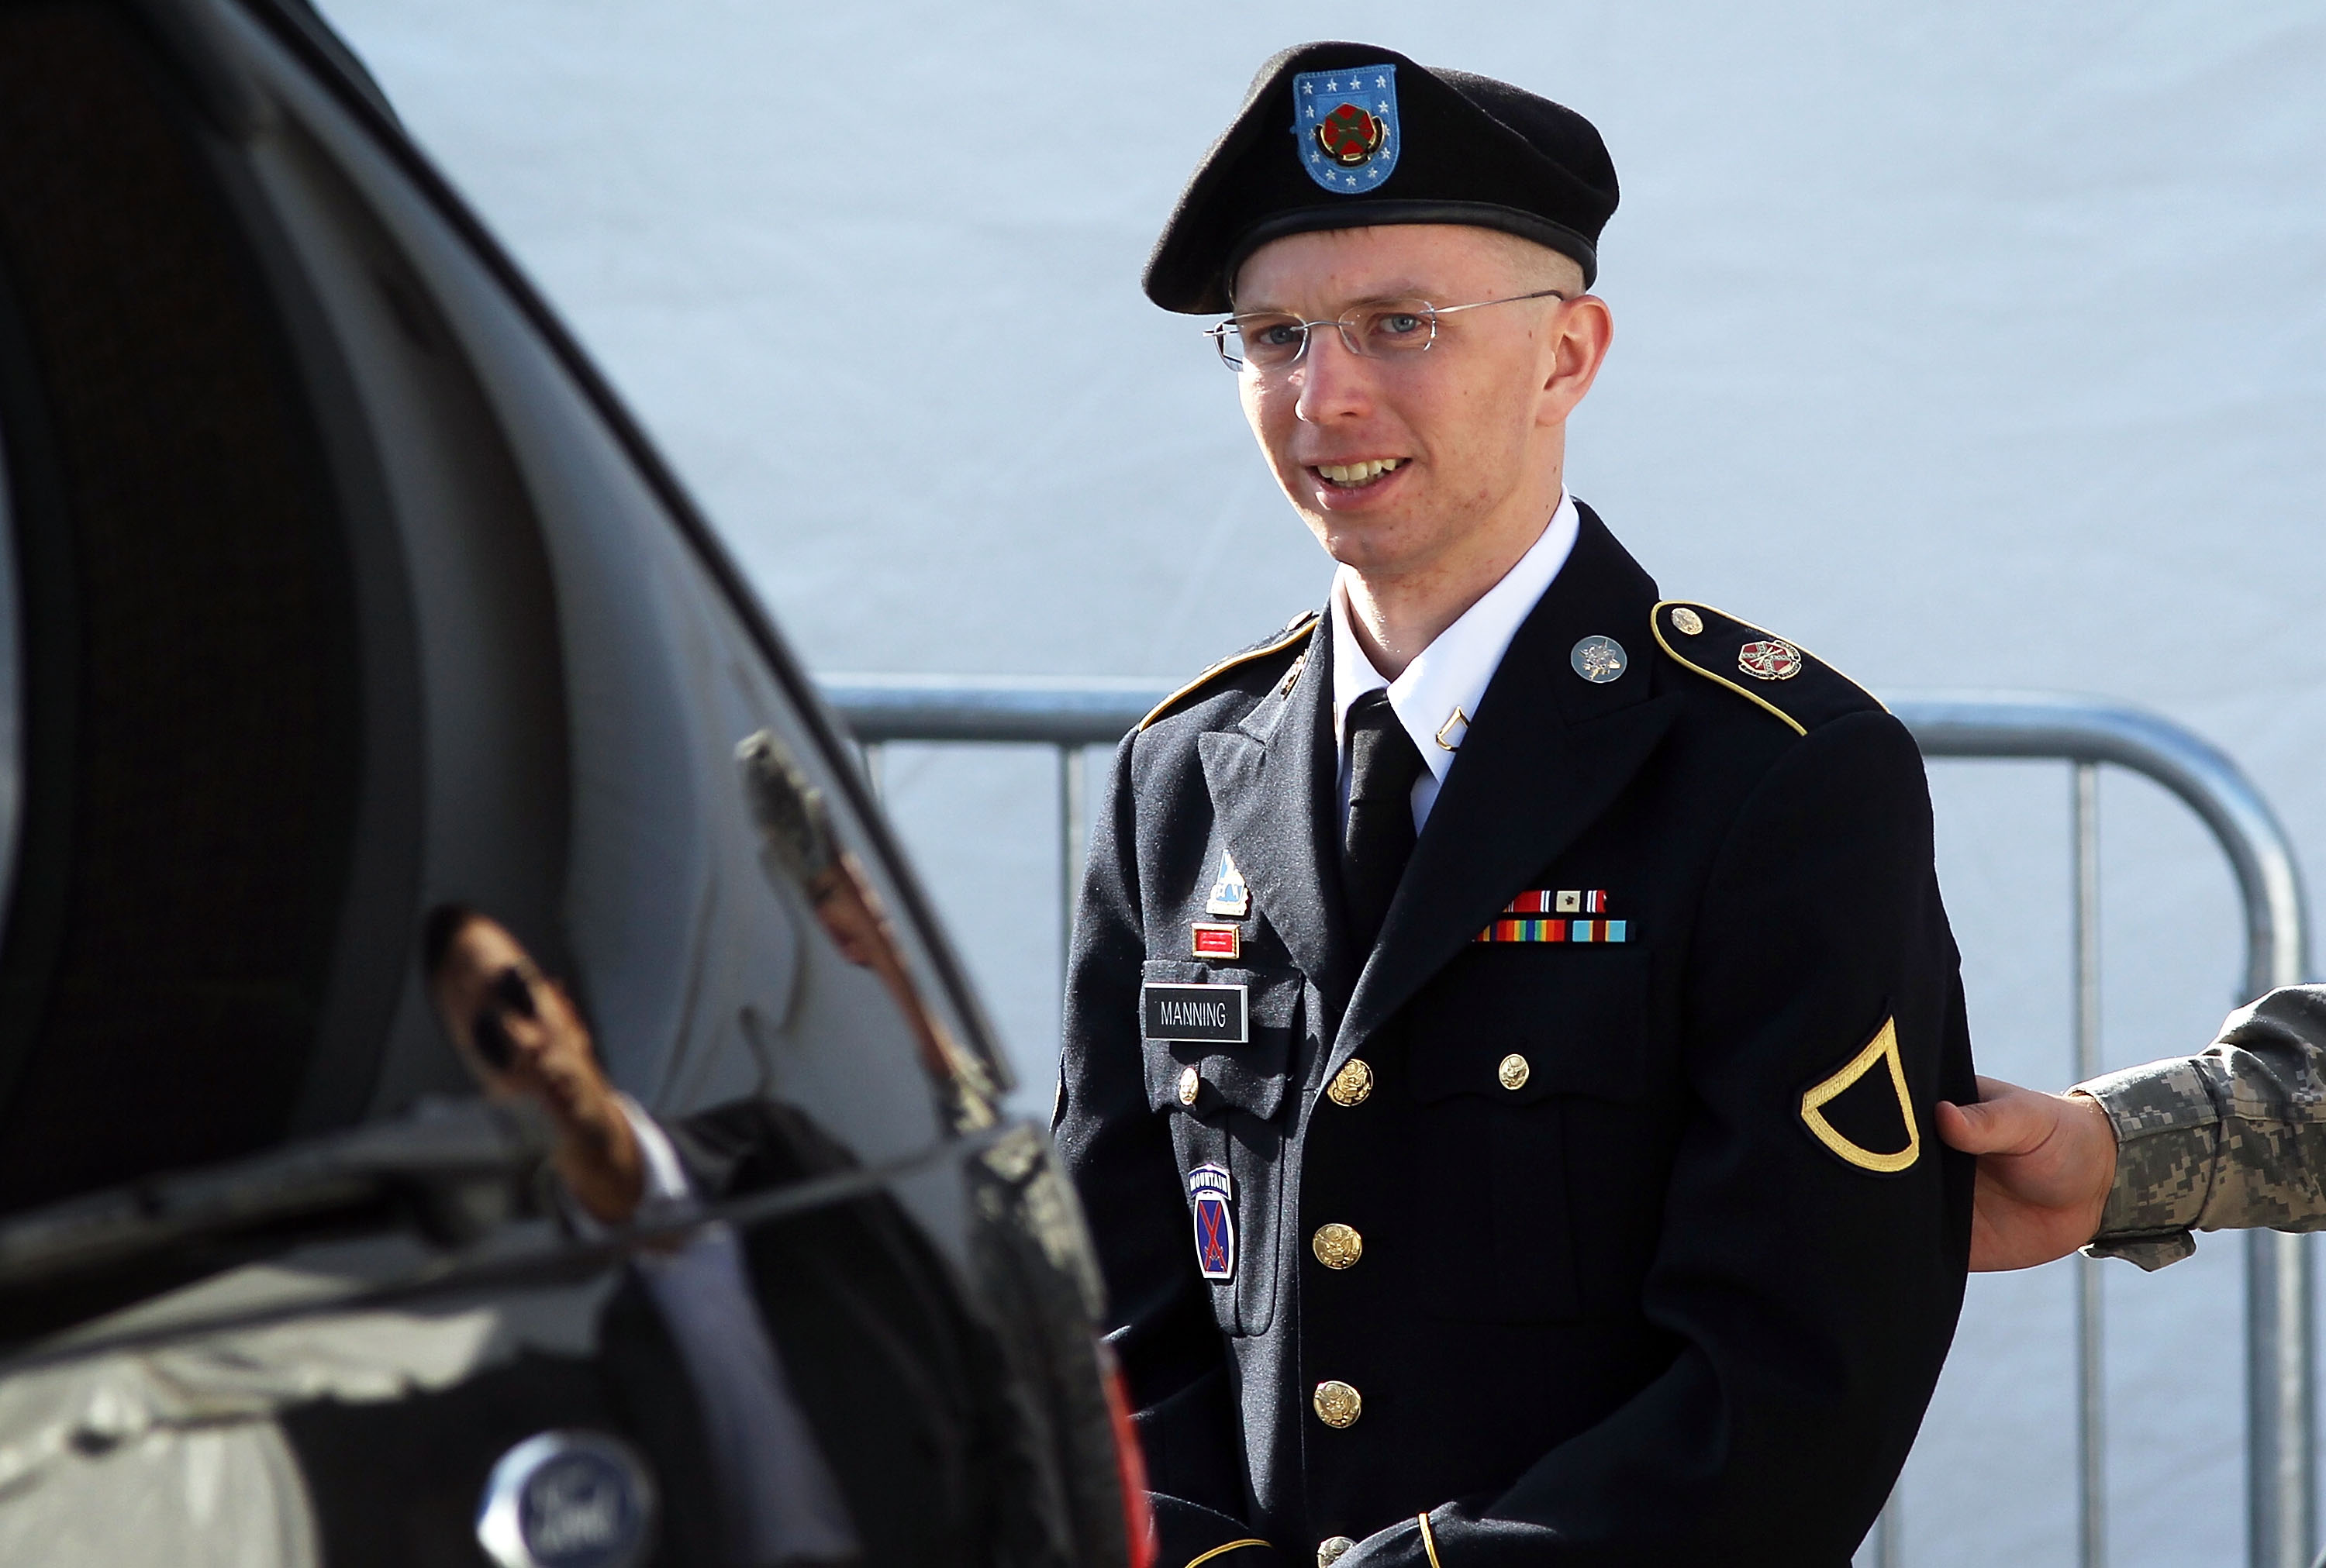 U.S. Army Private Bradley Manning is escorted as he leaves a military court at the end of the first of a three-day motion hearing June 6, 2012 in Fort Meade, Maryland. (Alex Wong—Getty Images)